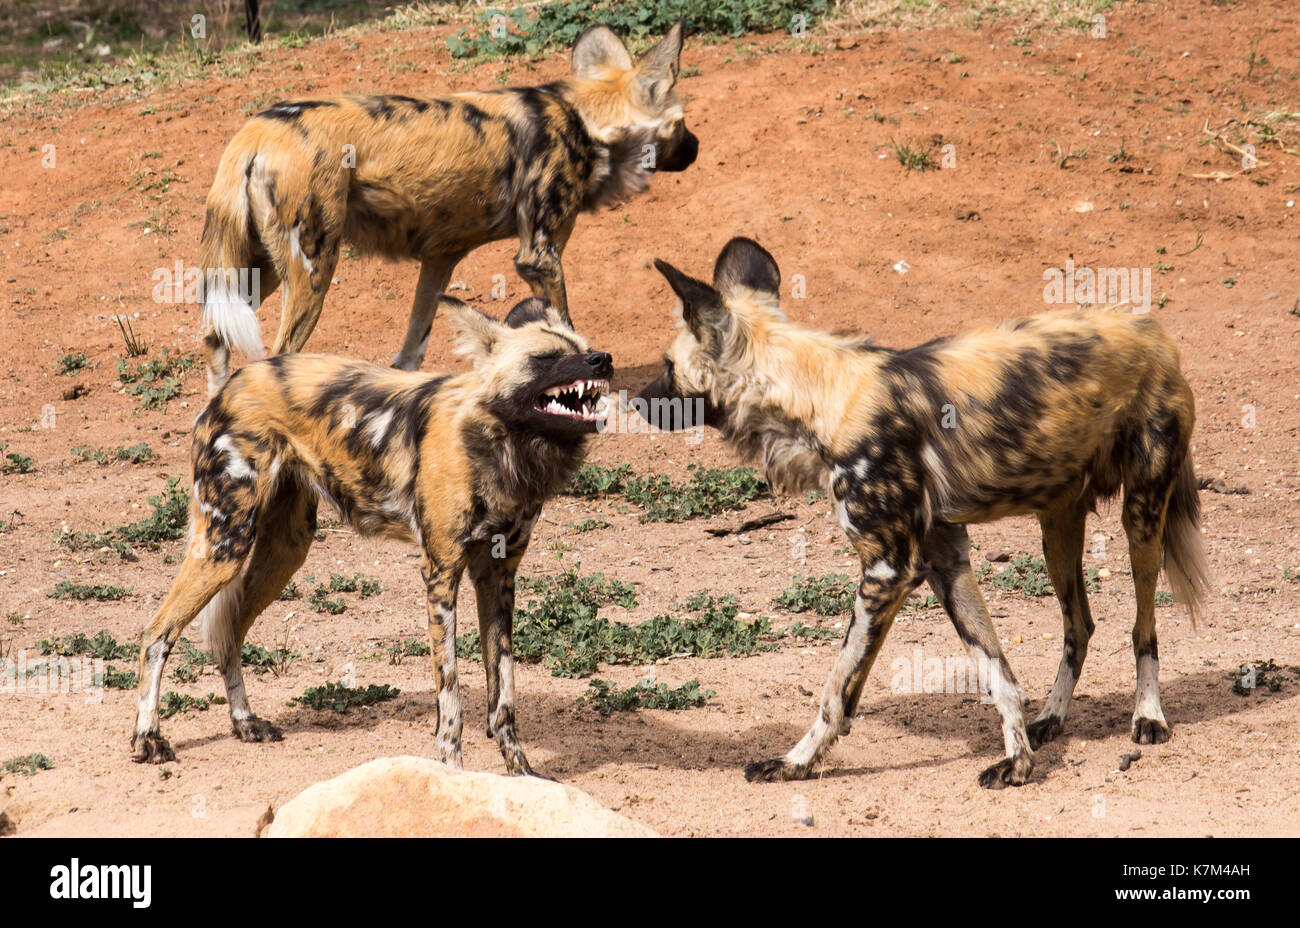 African Wild Dogs growling showing teeth in group of three standing on red dirt Stock Photo